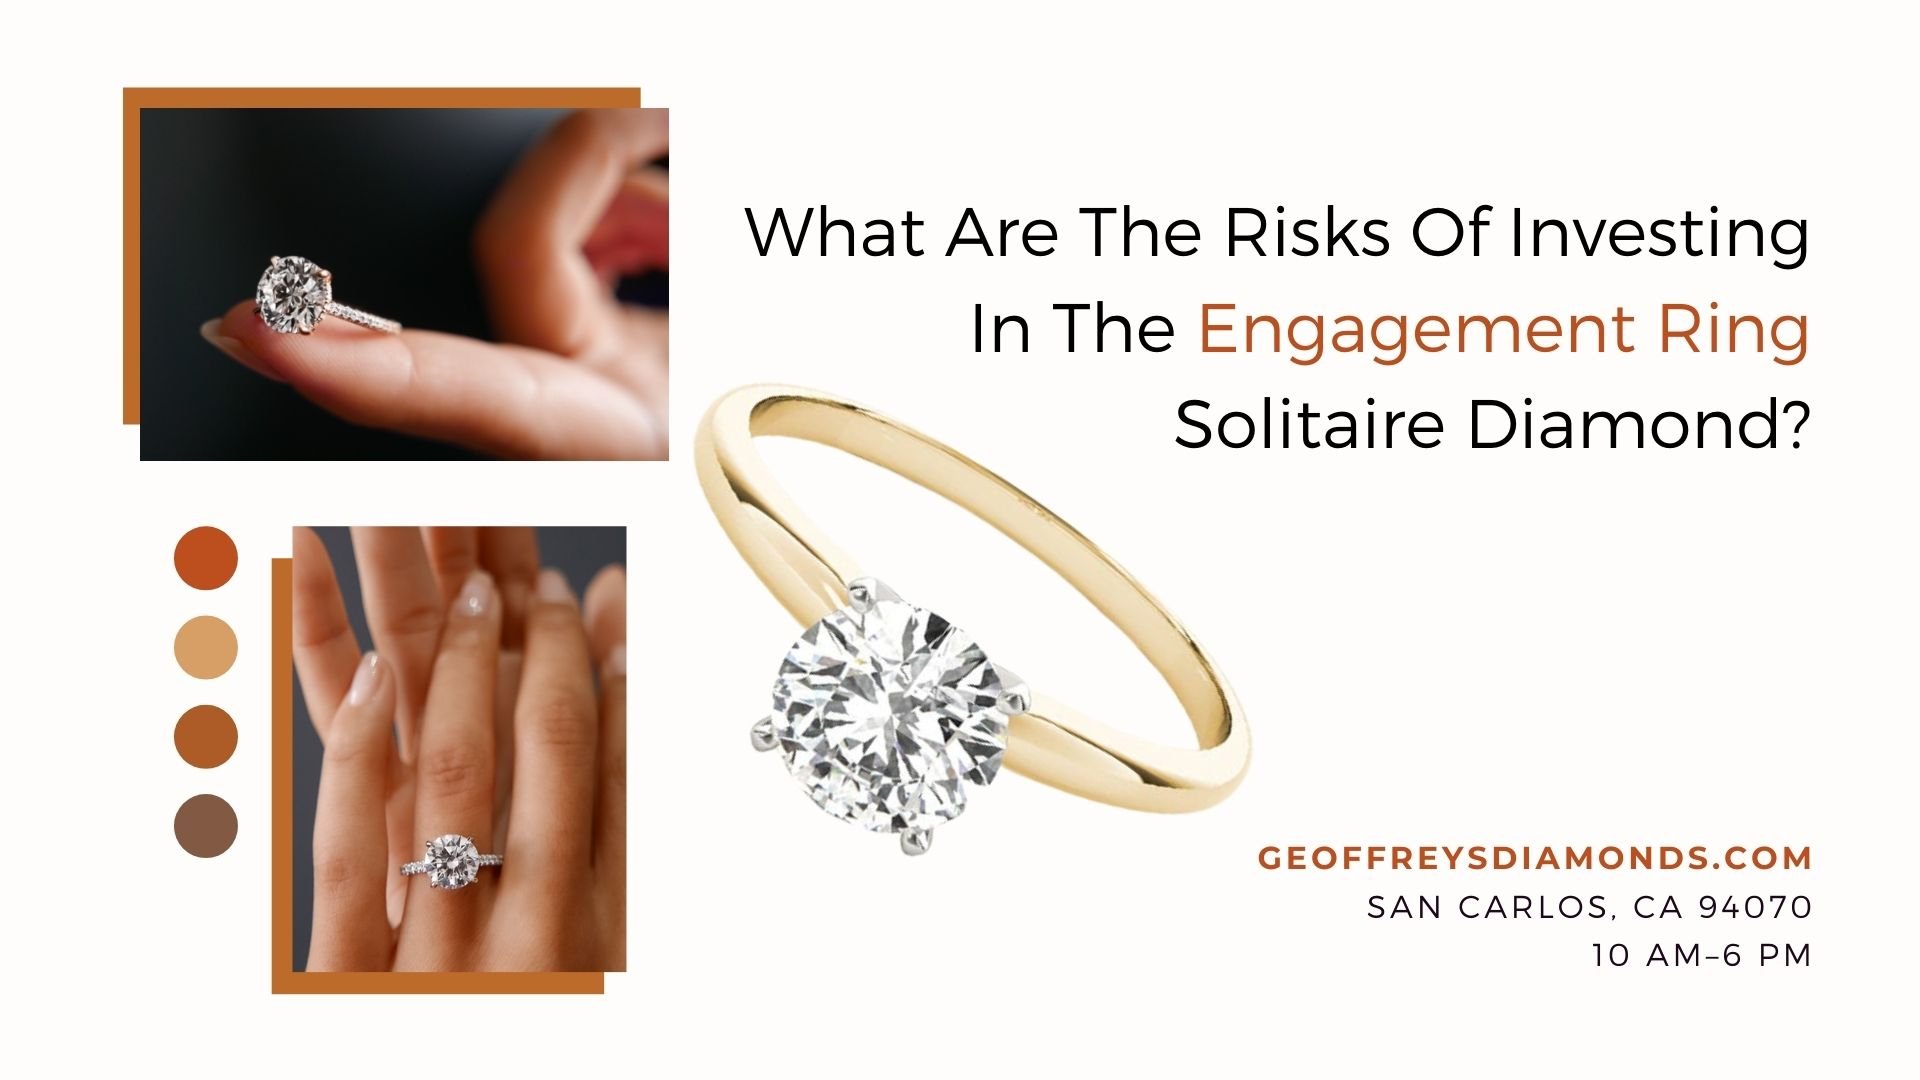 What Are The Risks Of Investing In The Engagement Ring Solitaire Diamond?